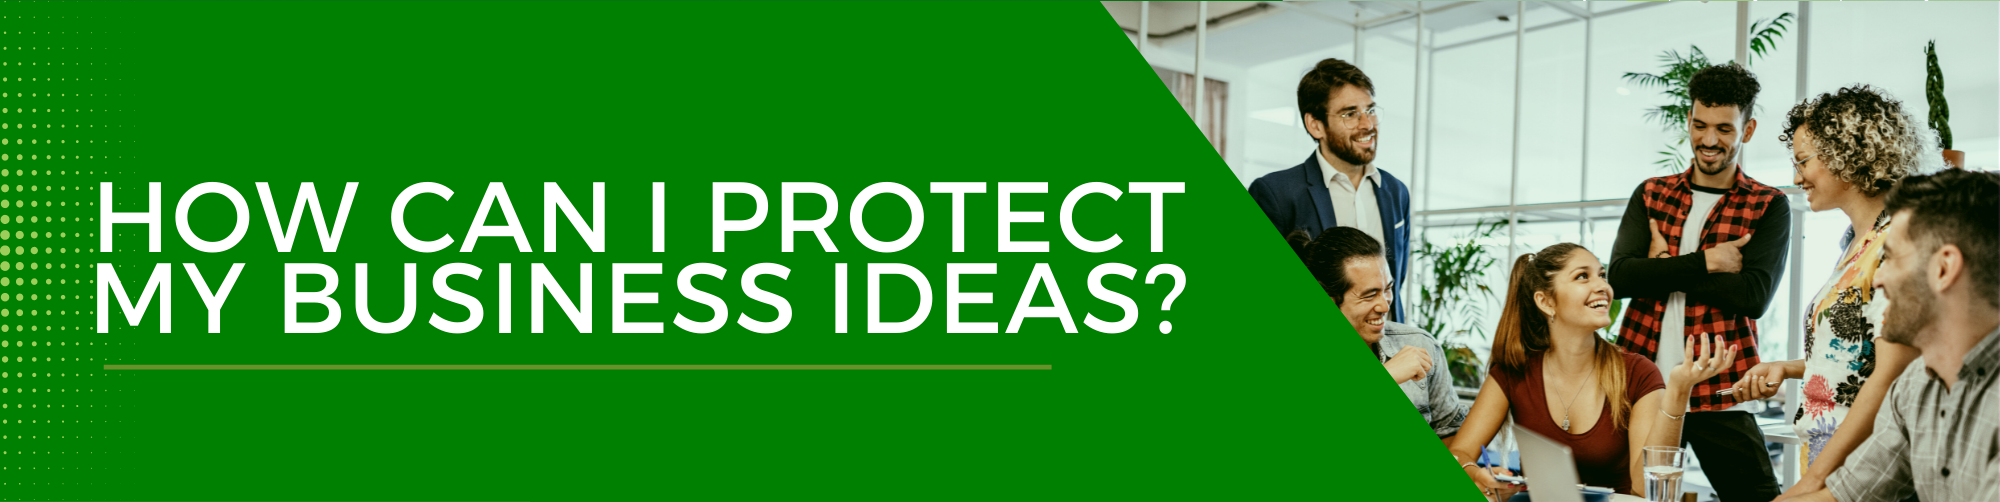 How can I protect my business Ideas Banner 14 -diarynigracia